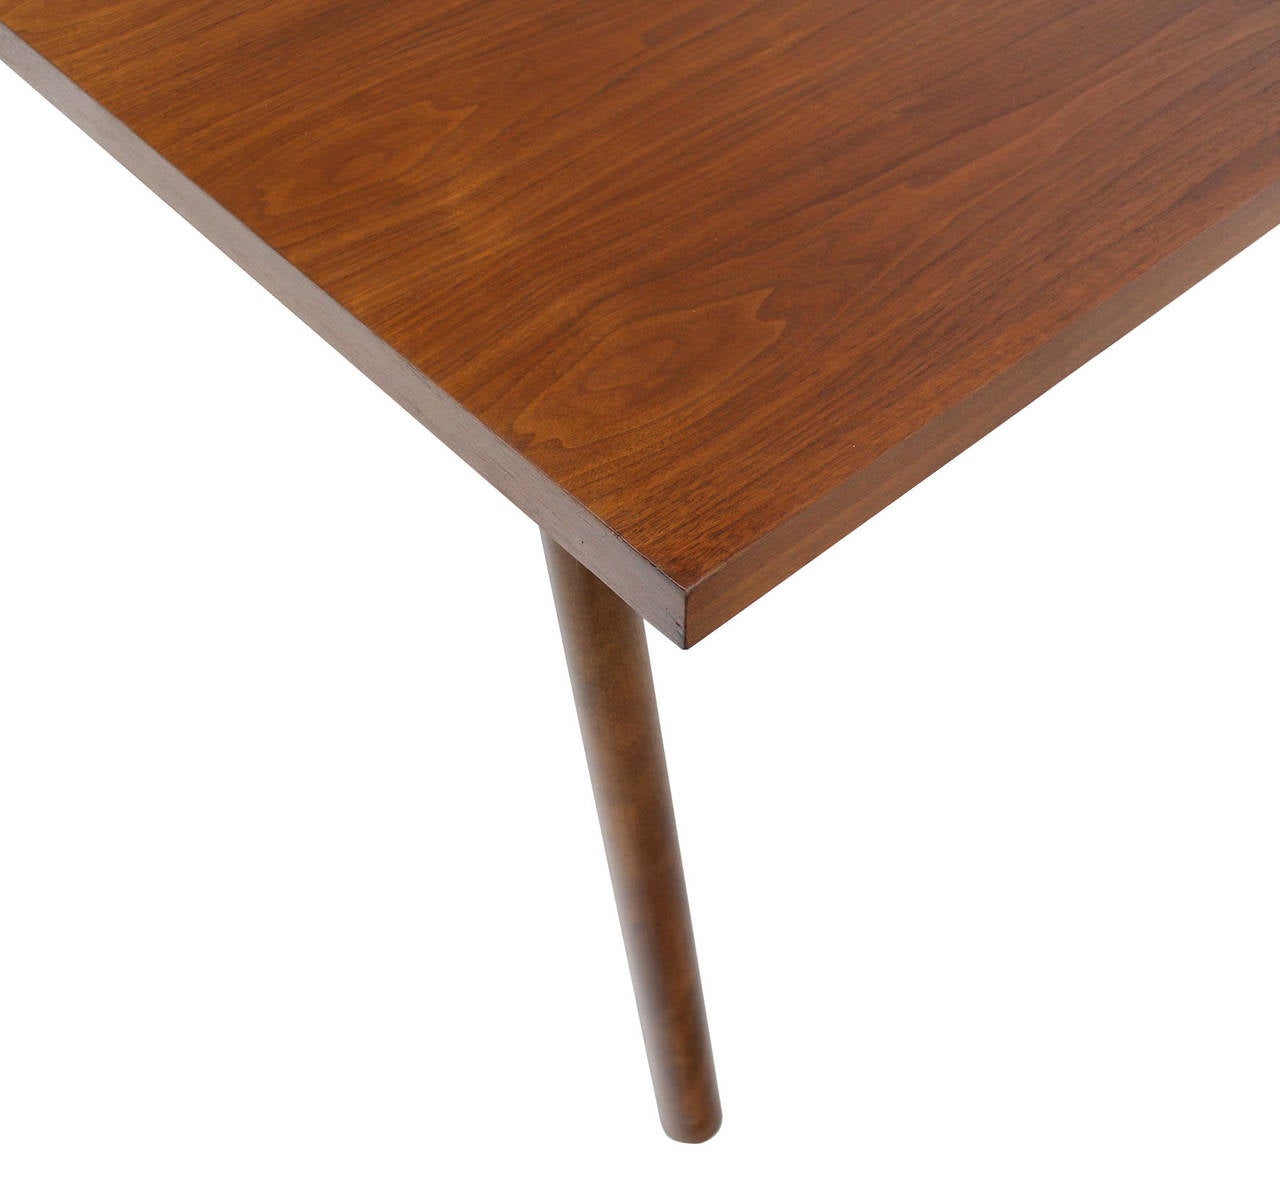 Robsjohn Gibbings Walnut Extention Dining Table with Two Leaves In Excellent Condition For Sale In Rockaway, NJ